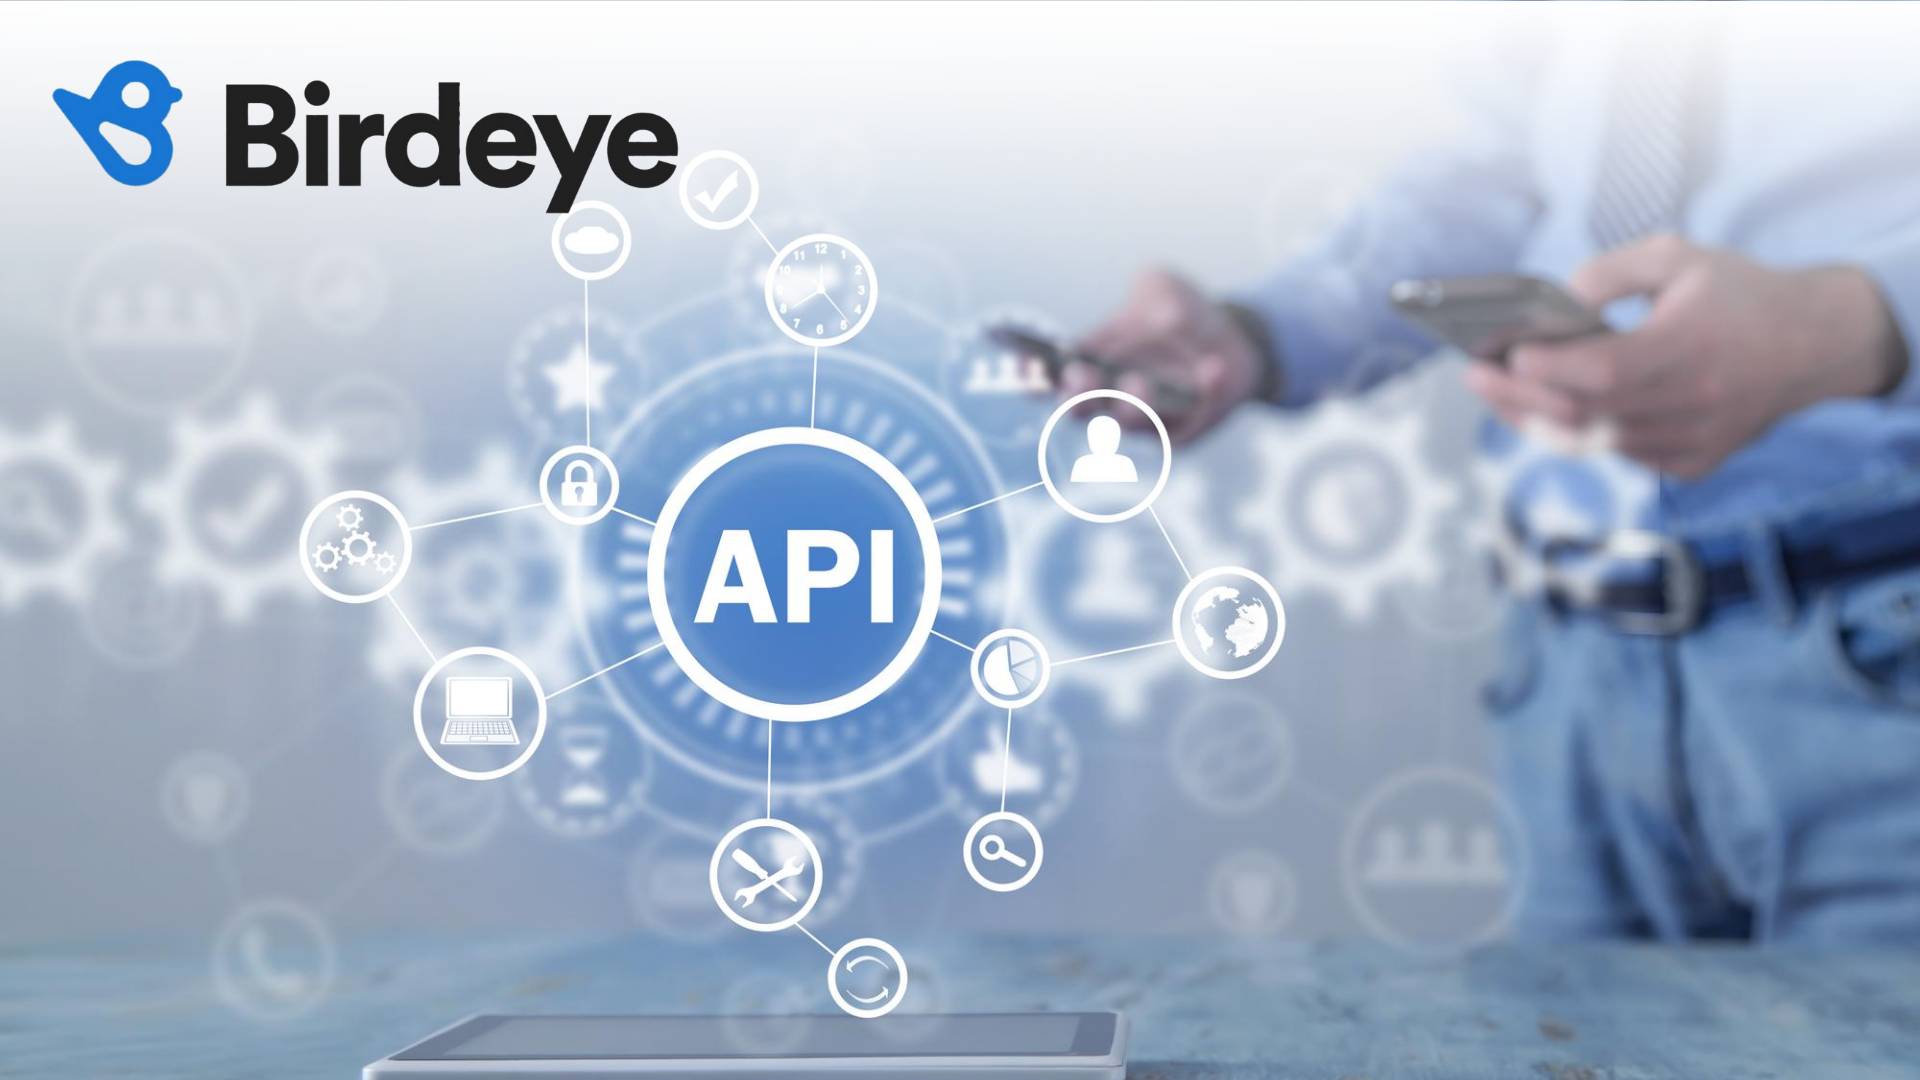 Birdeye Empowers Local Businesses with Apple Business Connect Integration